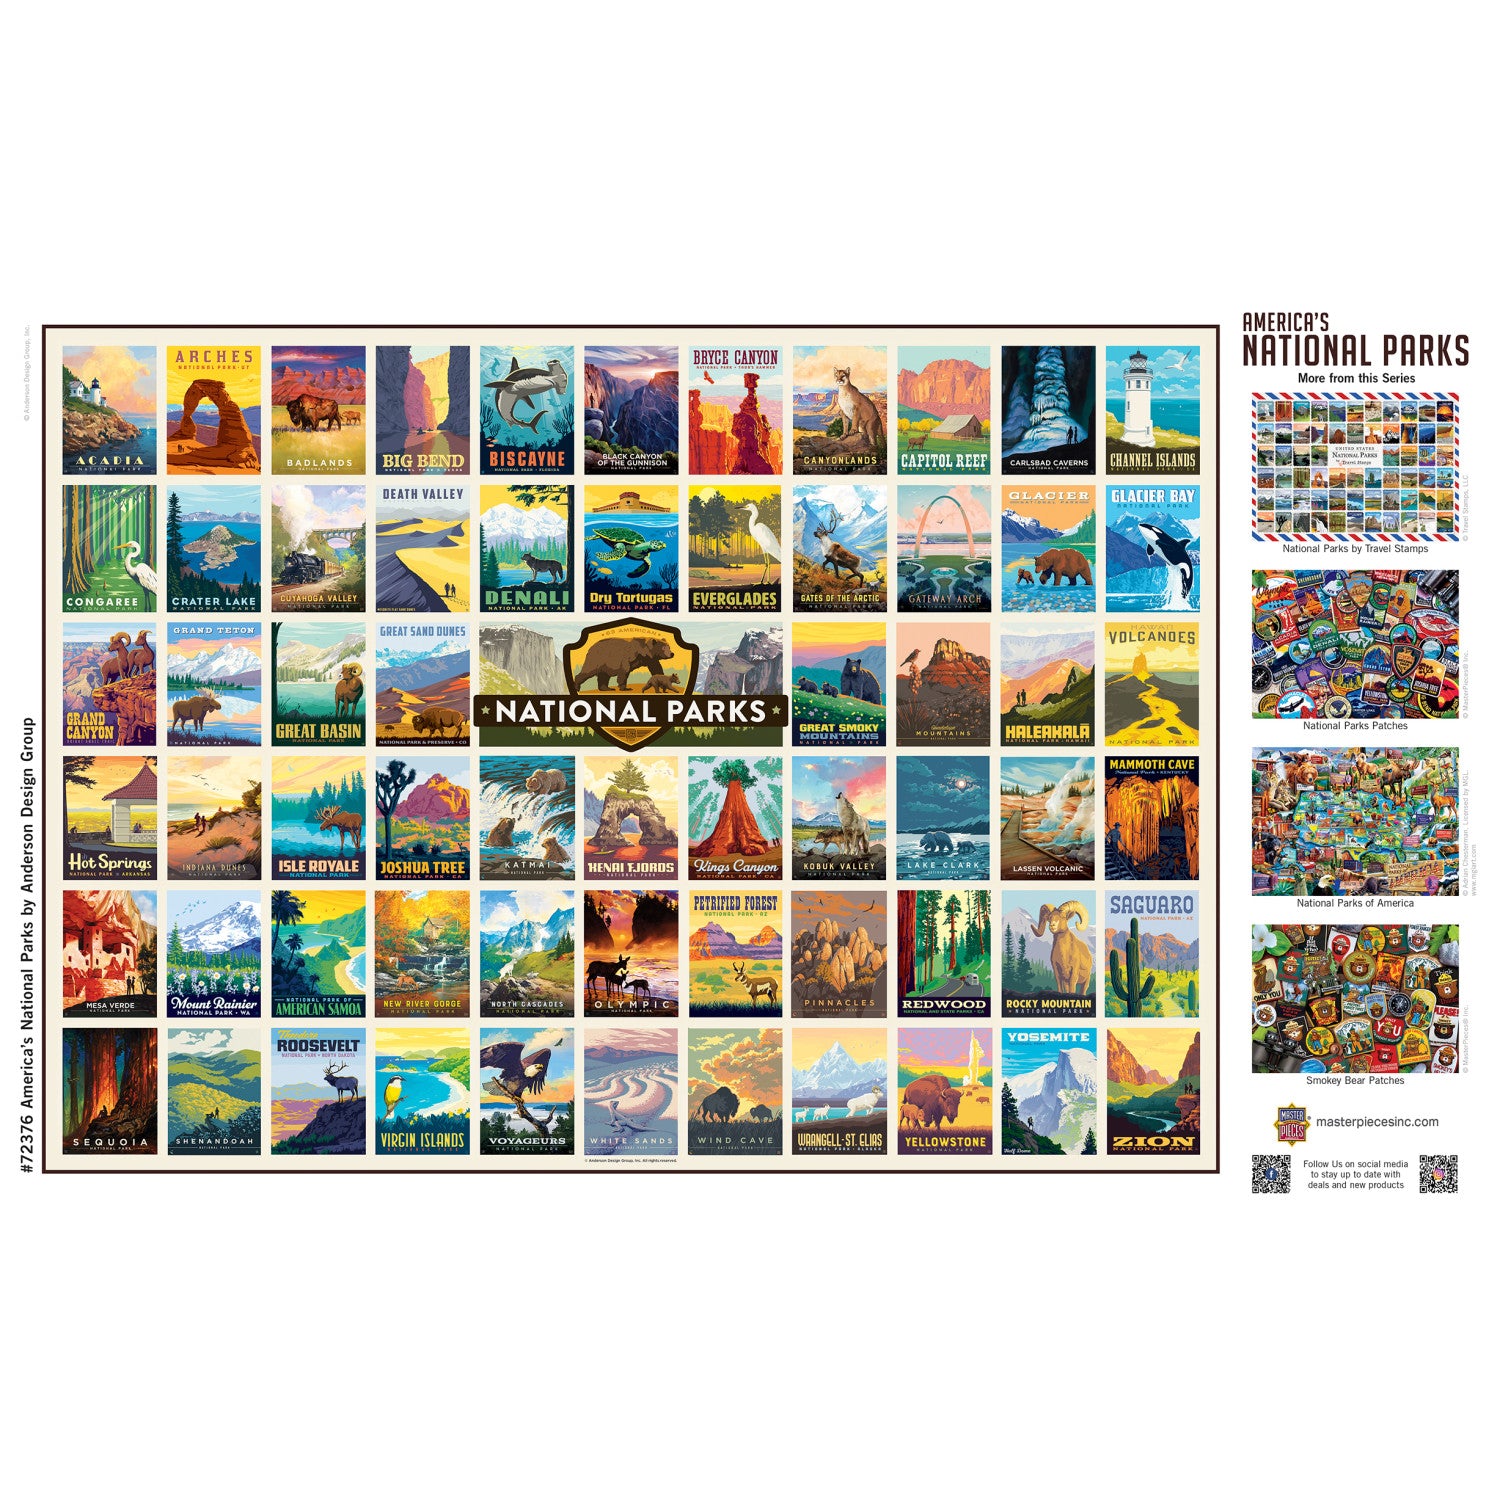 National Parks by Anderson Design Group 1000 Piece Puzzle